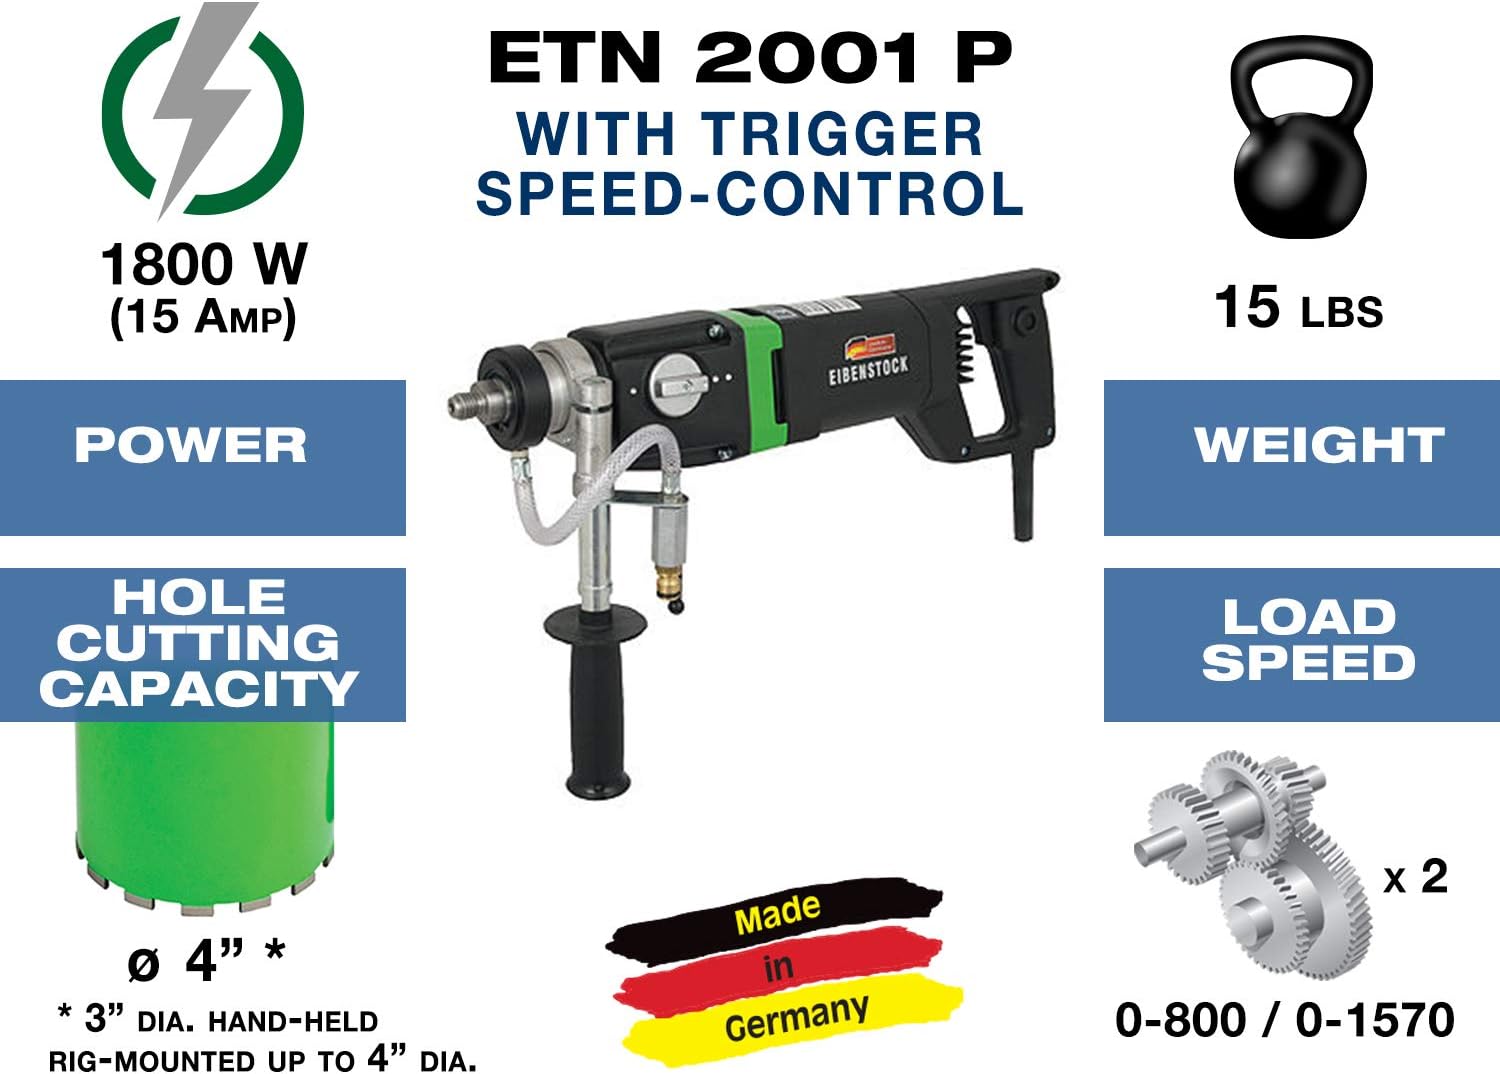 CS Unitec ETN 2001 P Up to 4 2-Speed Hand Held/Rig Mounted - Wet/Dry Concrete Core Drill - for Concrete, Brick, Block, and Stone - Made in Germany - 110V